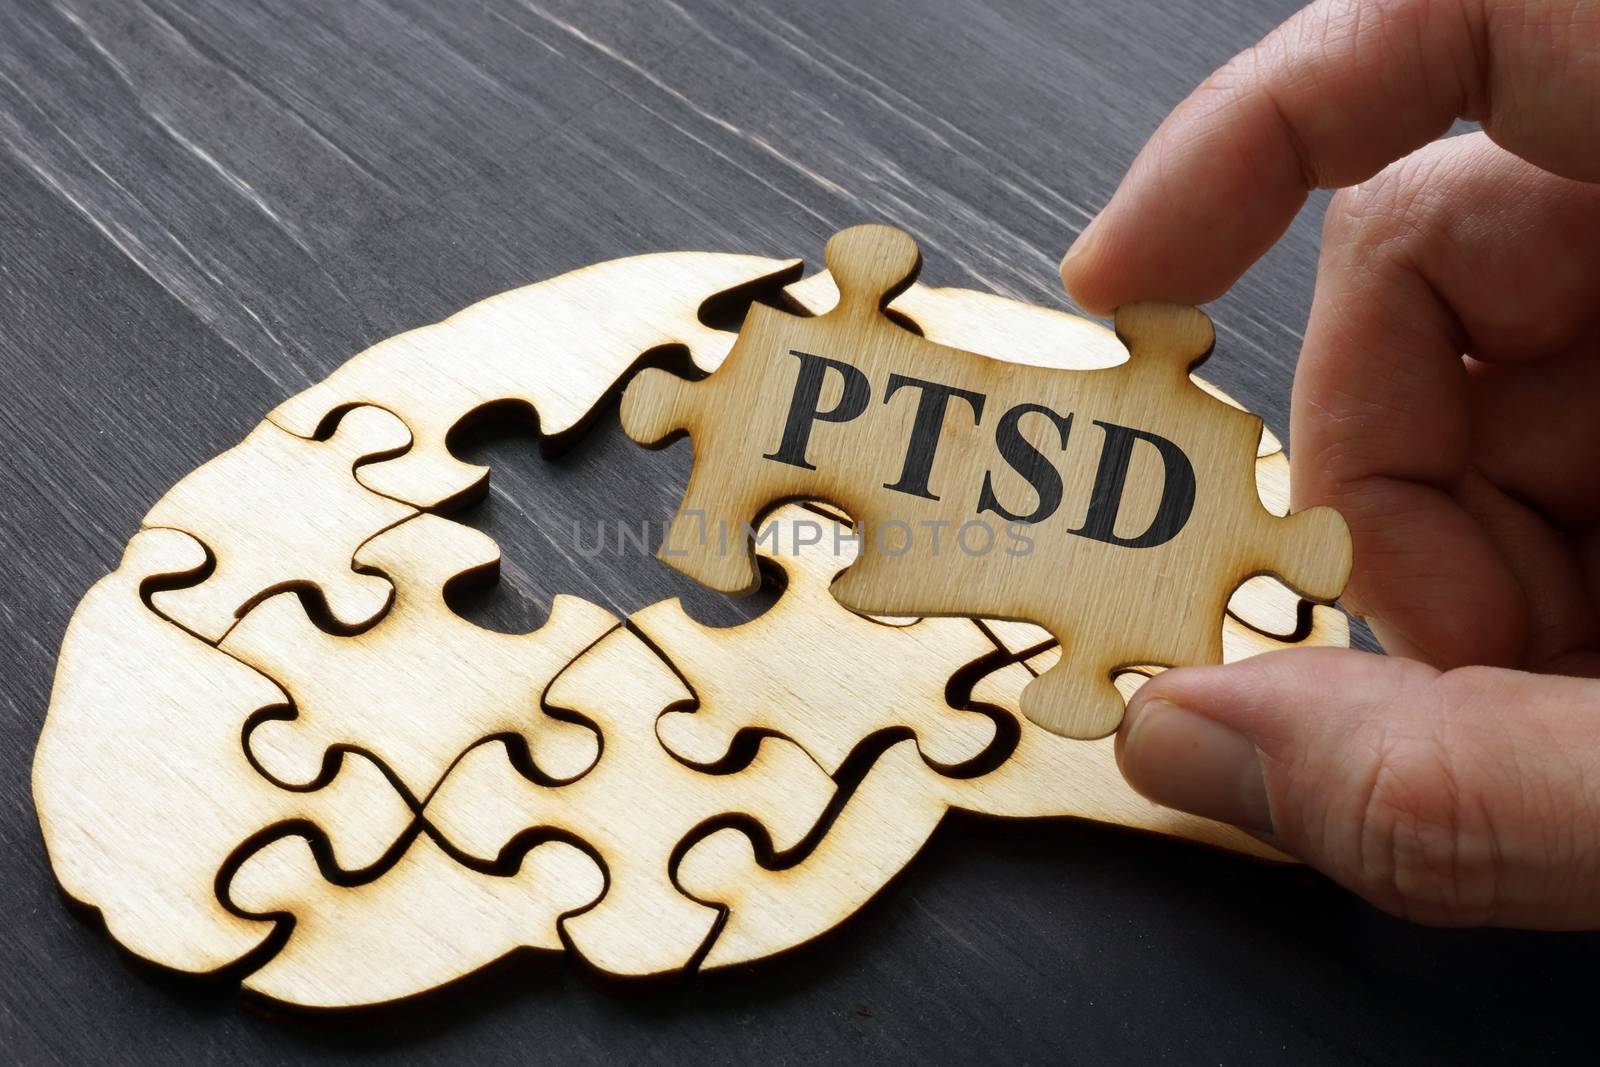 PTSD Post Traumatic Stress written on the puzzle. by designer491